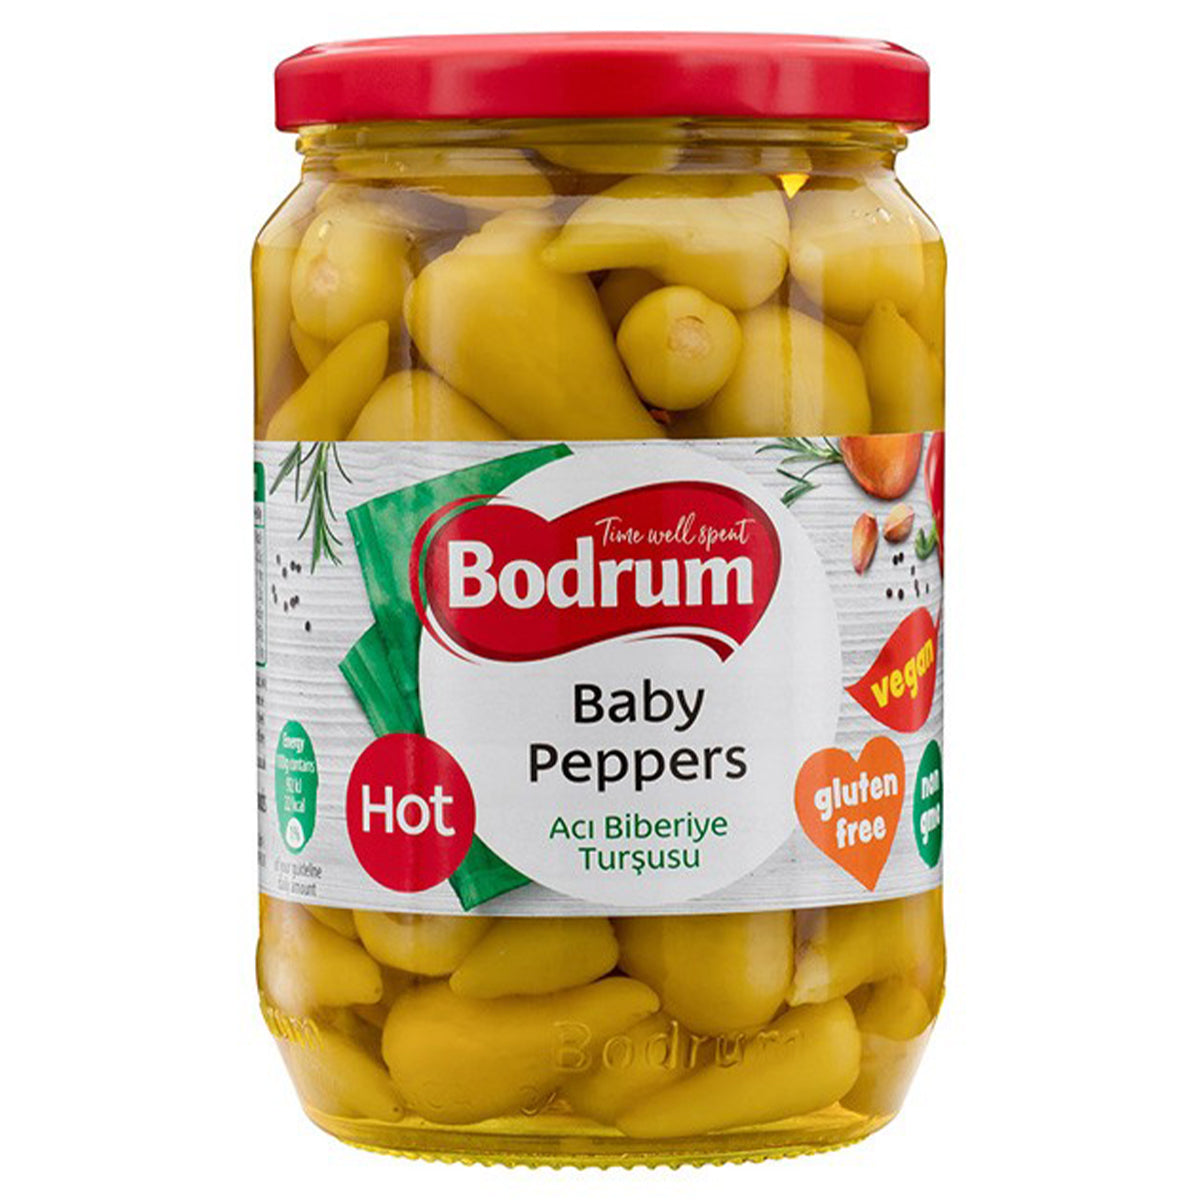 Bodrum Baby Peppers - 640g hot.